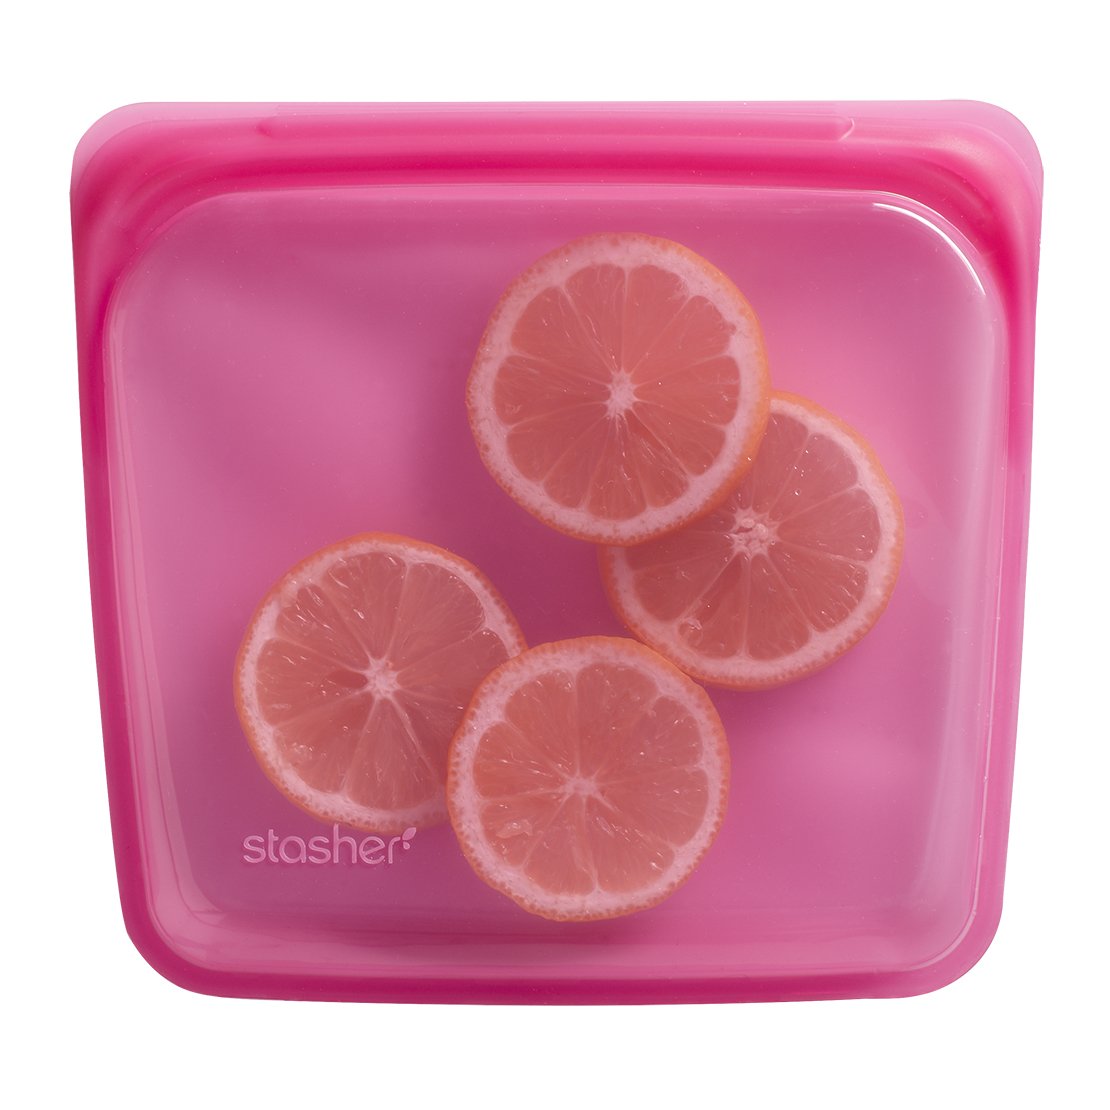 Stasher reusable silicone bags for lunchboxes are a favorite of ours and a best-seller on Amazon